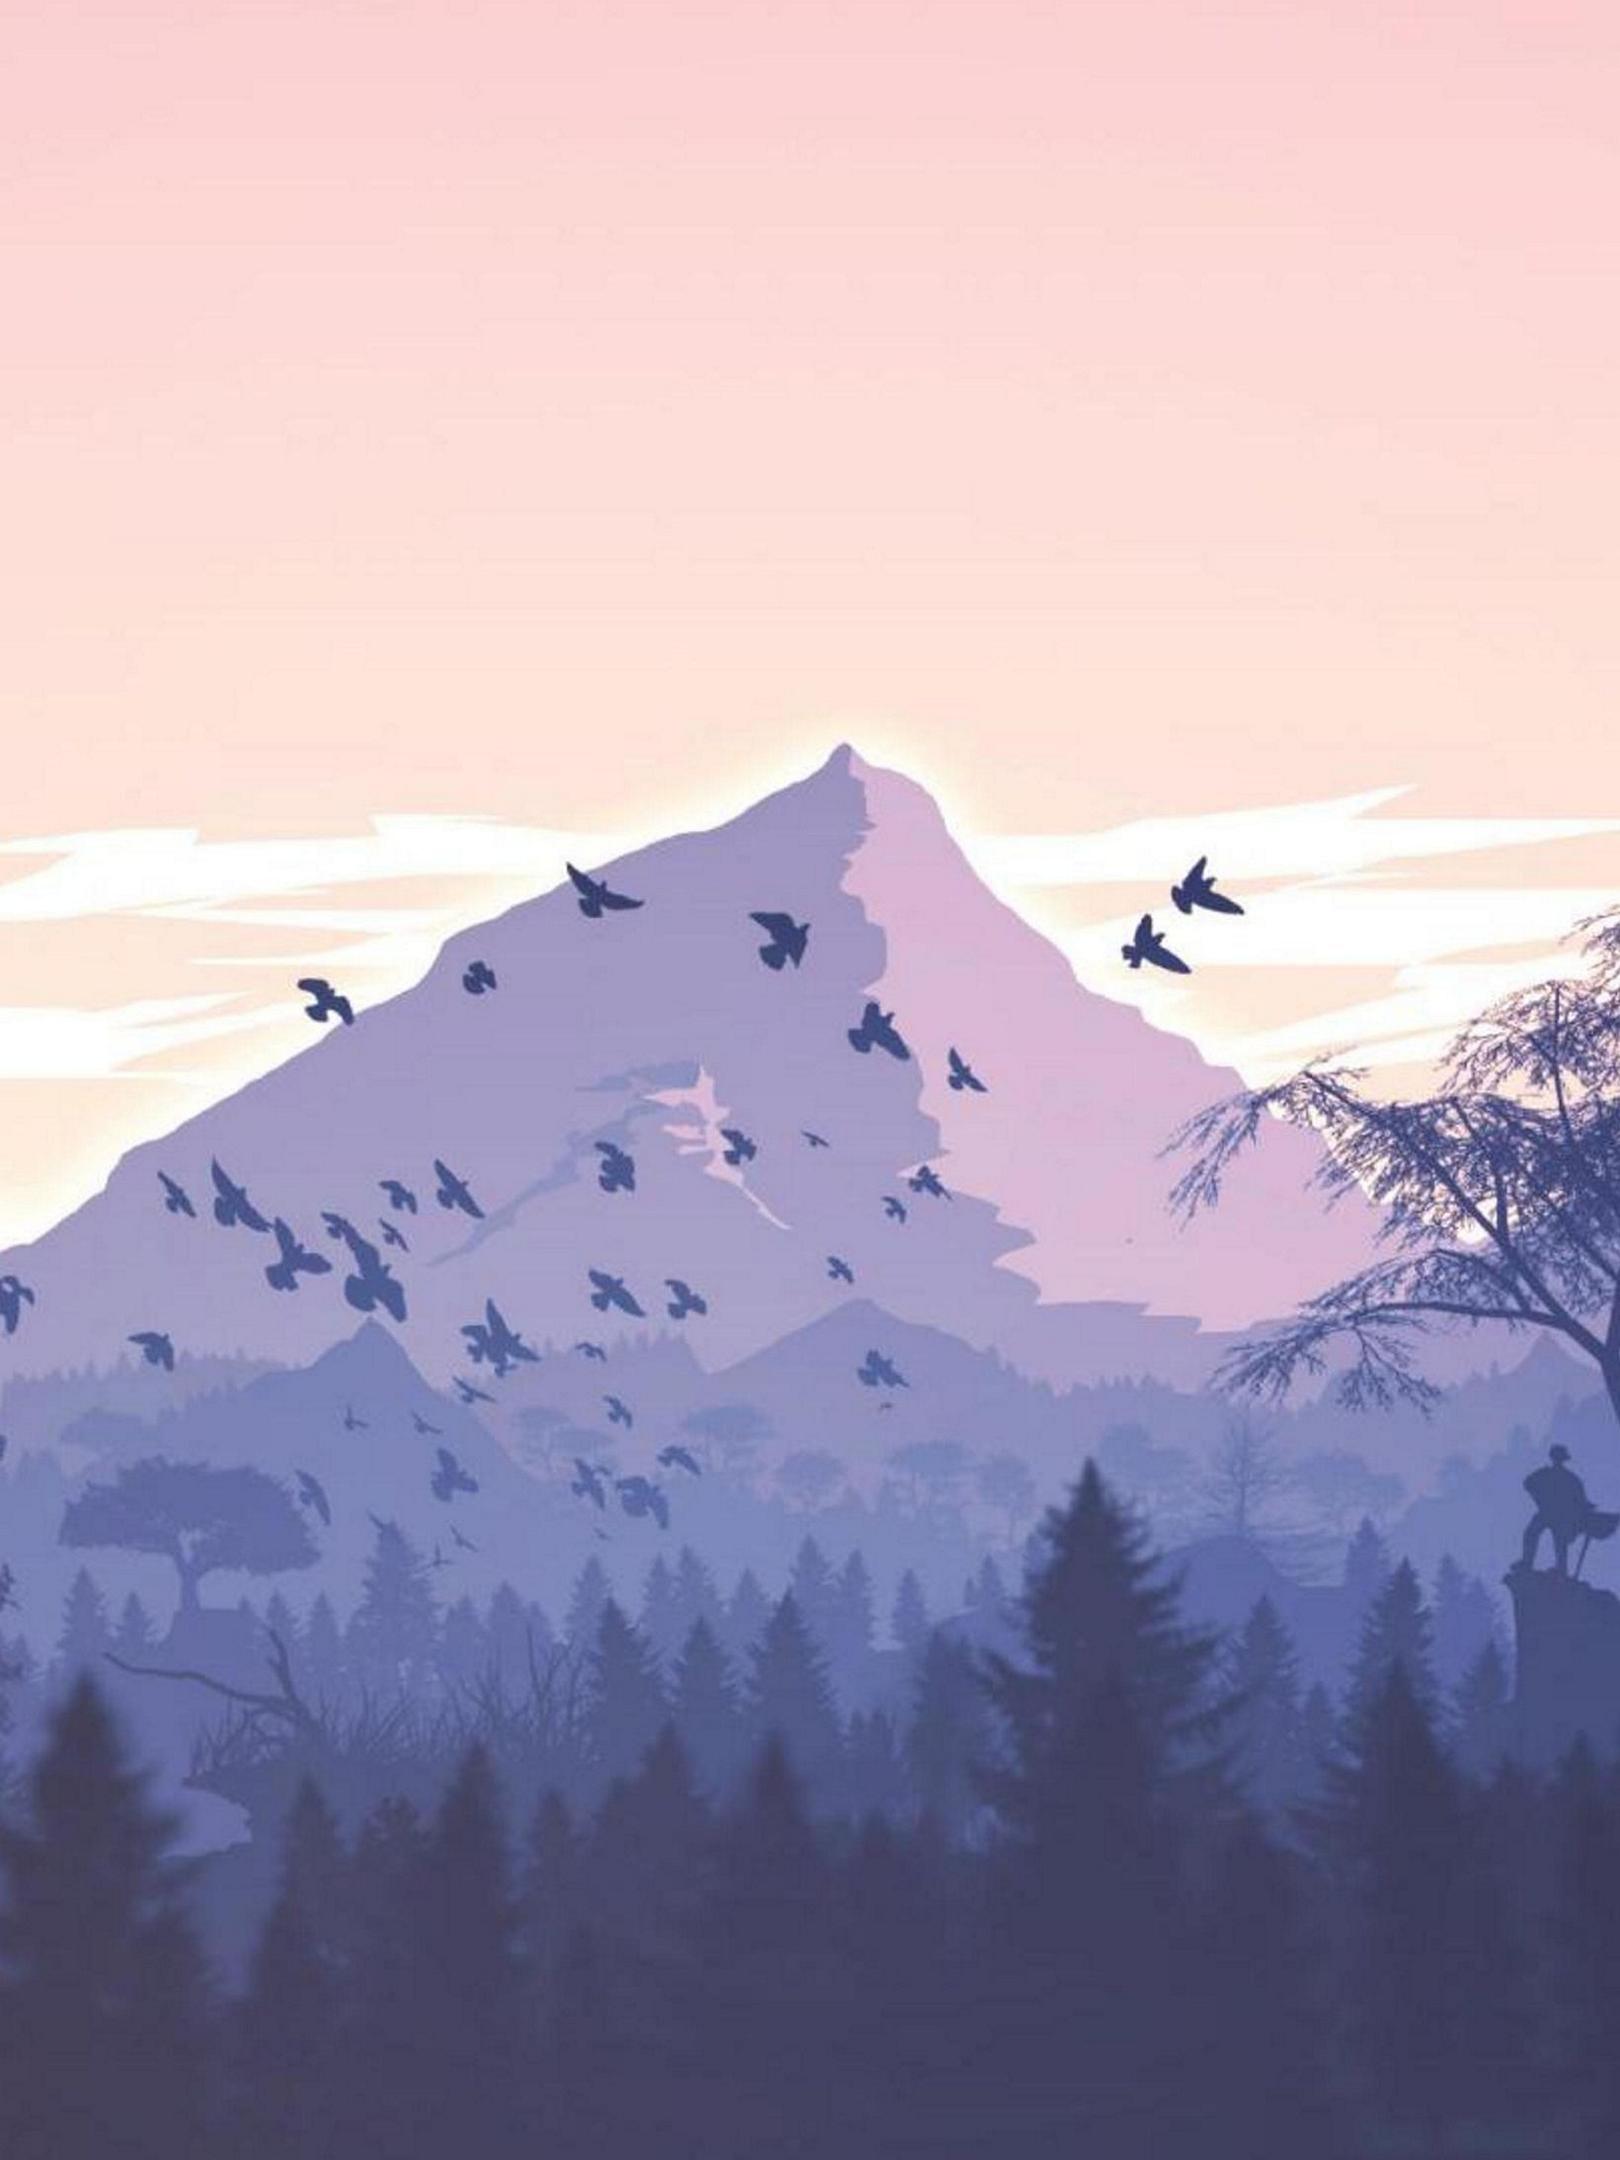 3840x2400 Minimalism Birds Mountains Trees Forest 4k Hd 4k Wallpapers